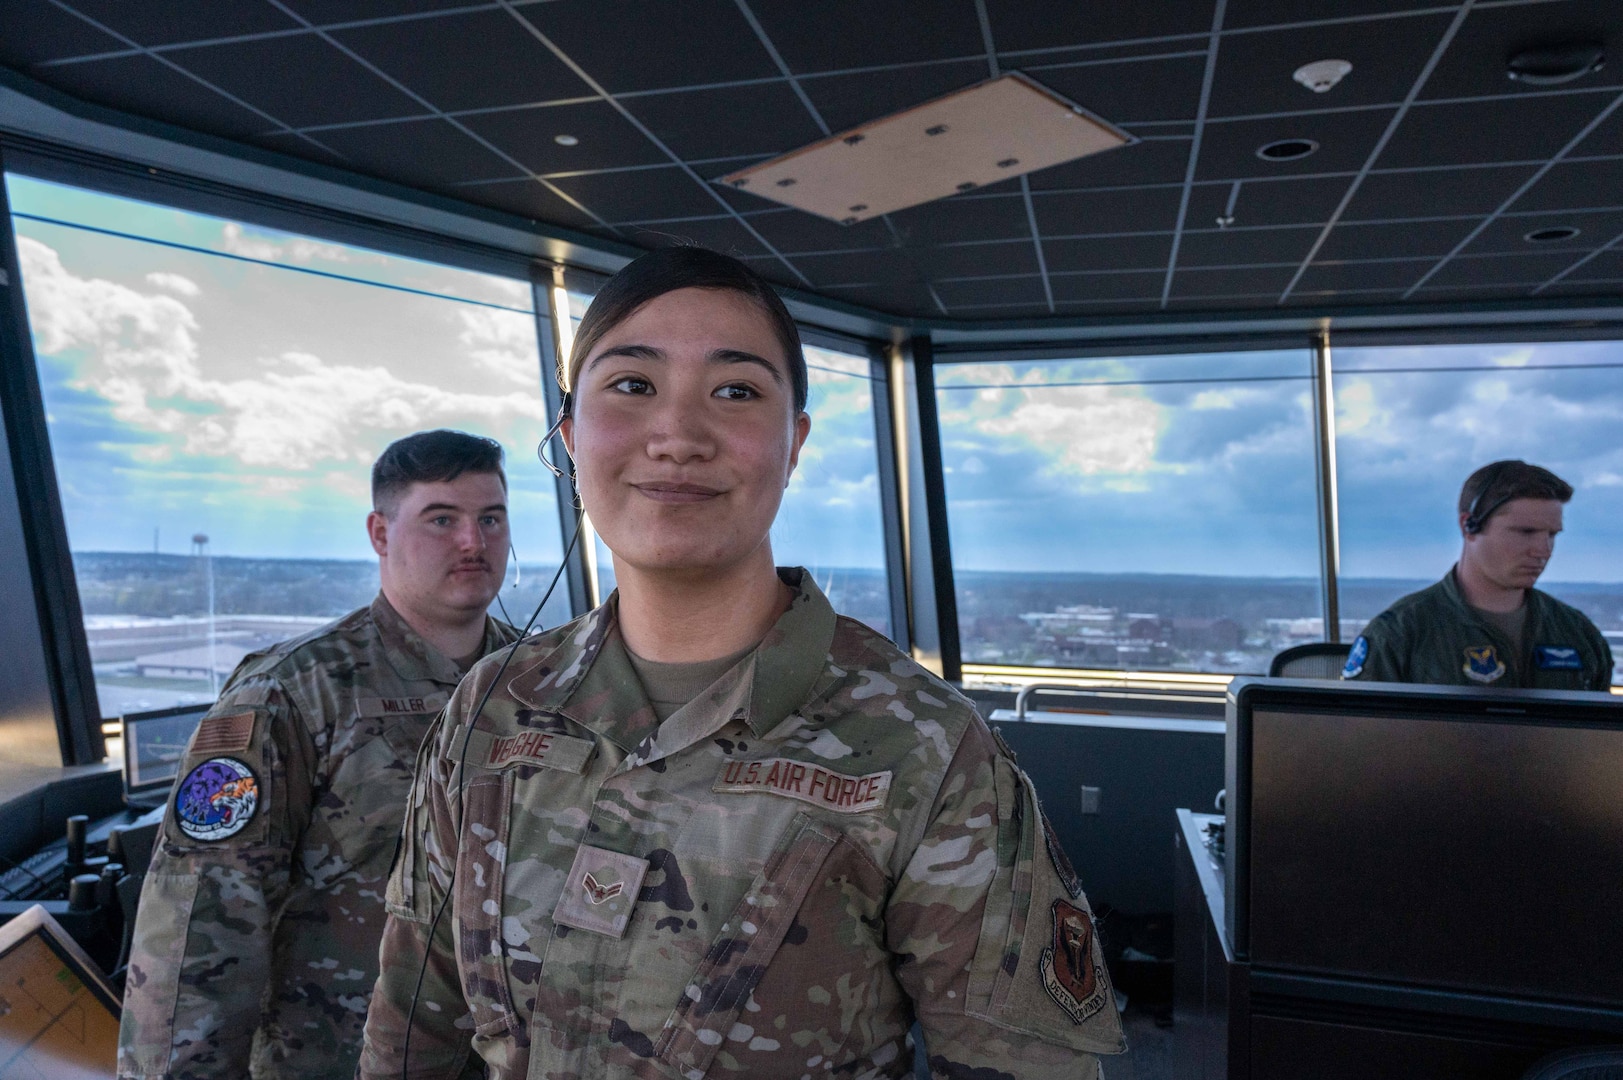 U.S. Air Force Airman 1st Class Lucienne Velghe, 509th Operations Support Squadron air traffic controller, overlooks the flight line April 7, 2022 on Whiteman Air Force Base, Mo. Air traffic controllers are responsible for controlling safe and orderly air traffic flow on the flight line and in the air. (U.S. Air Force photo by A1C Devan Halstead)